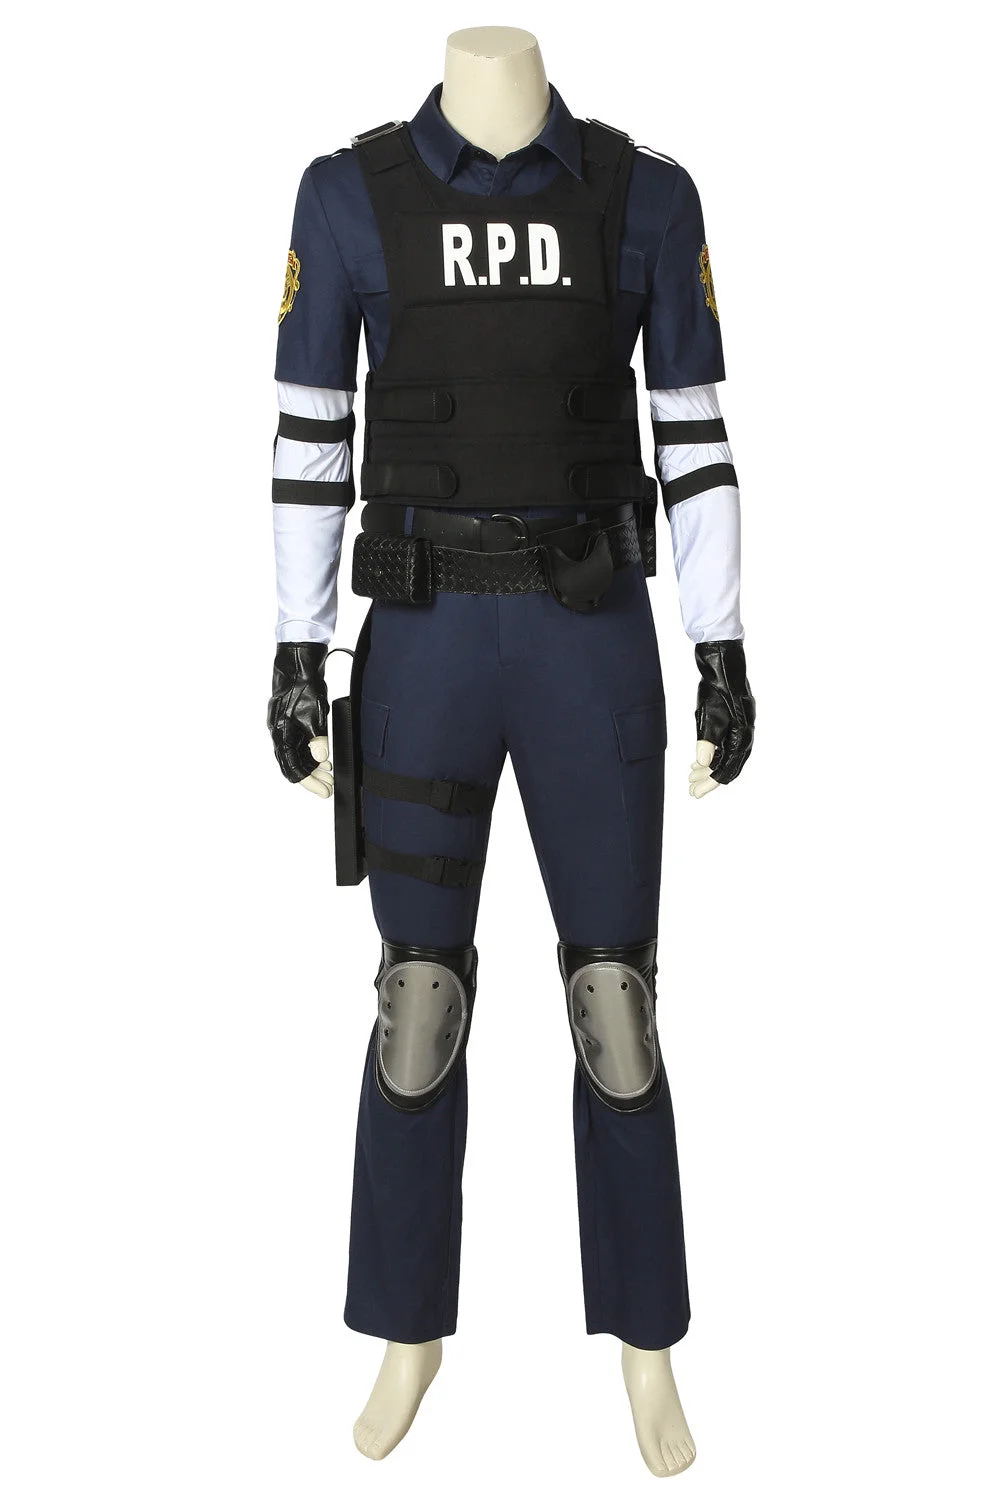 Resident Evil 2 Remake Cosplay Leon R.P.D. Suit Cosplay Costume